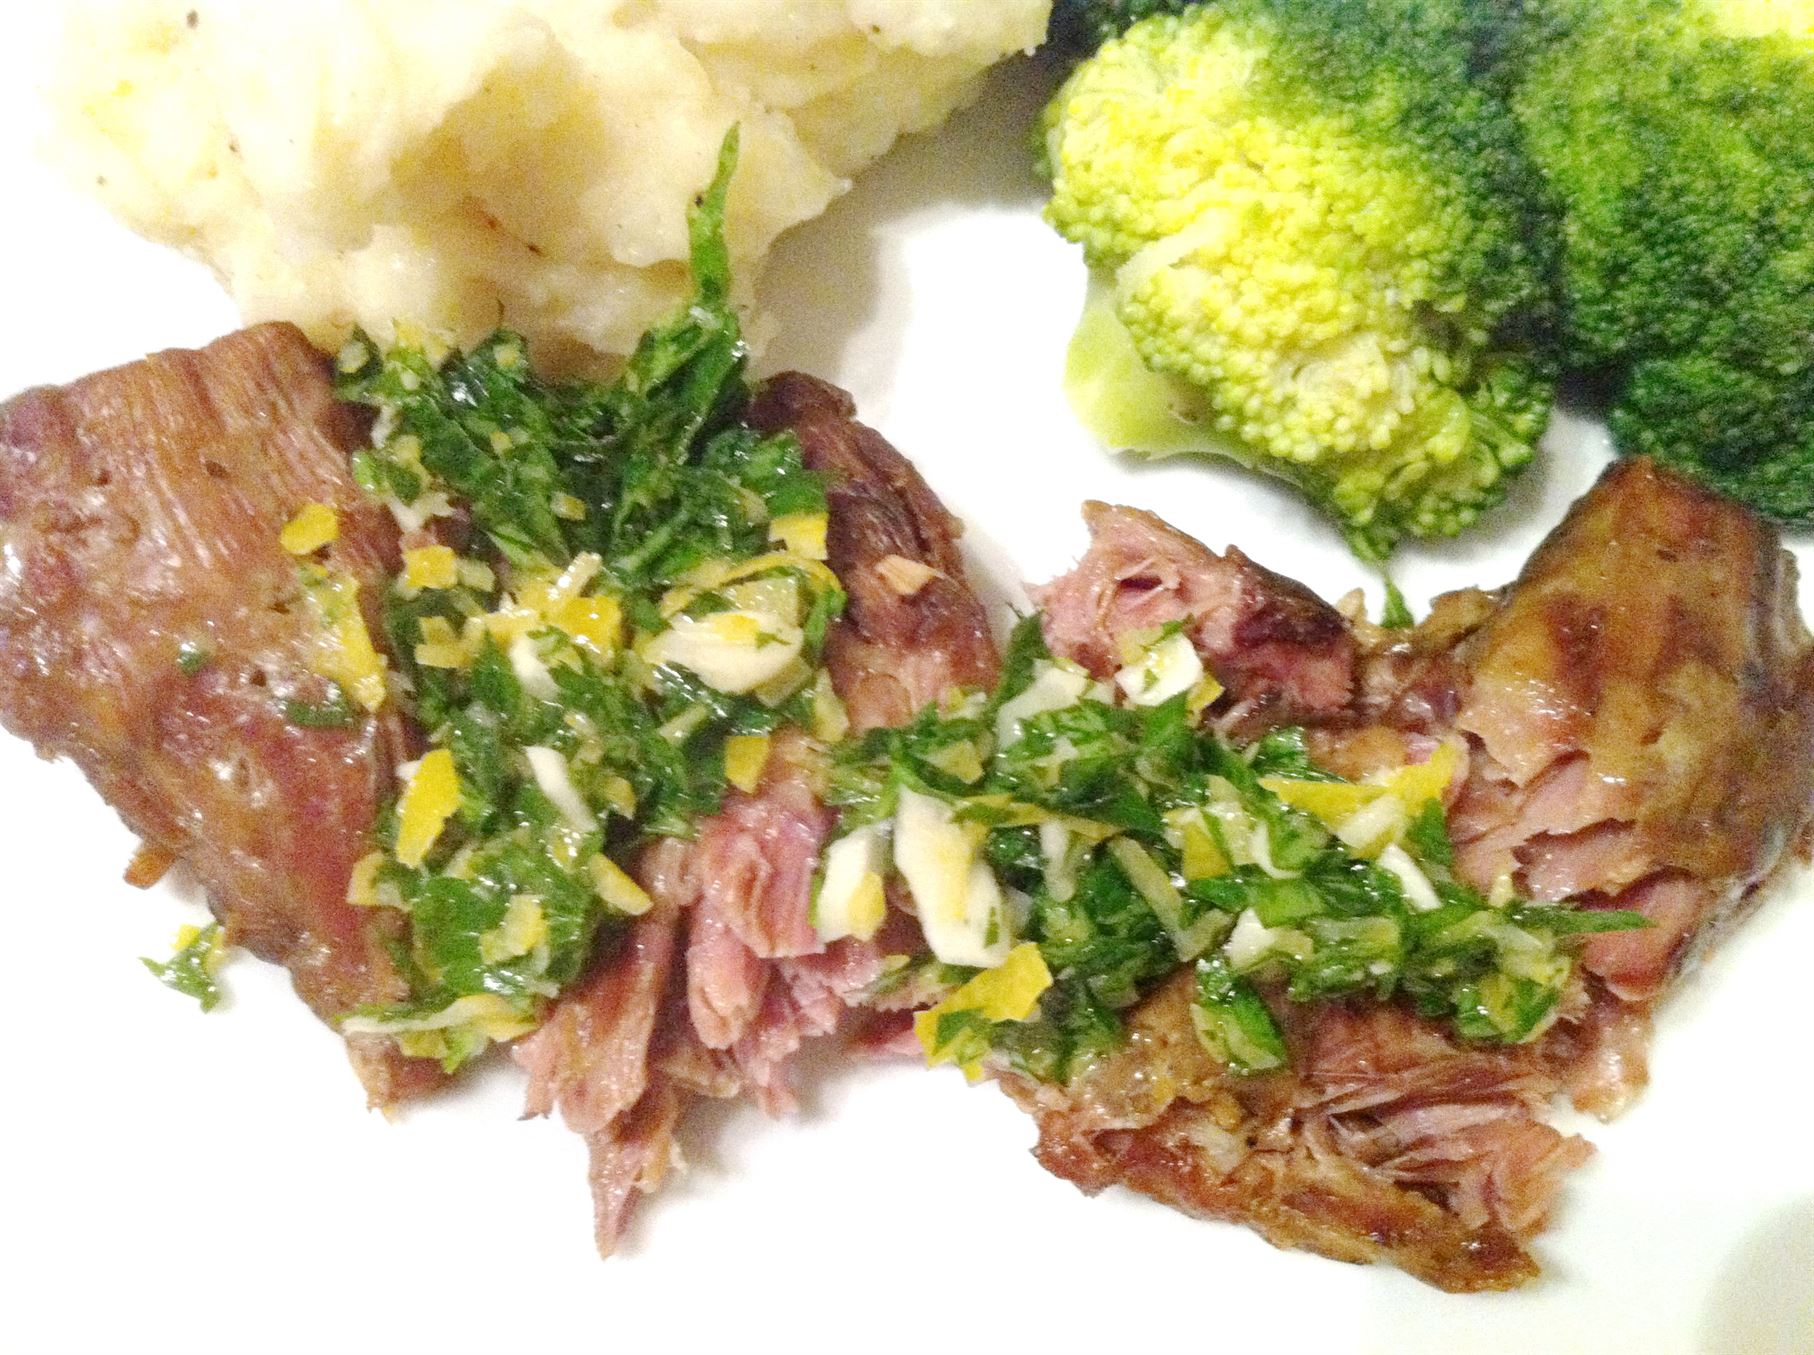 Slow-braised lamb neck with gremolata, Lay The Table